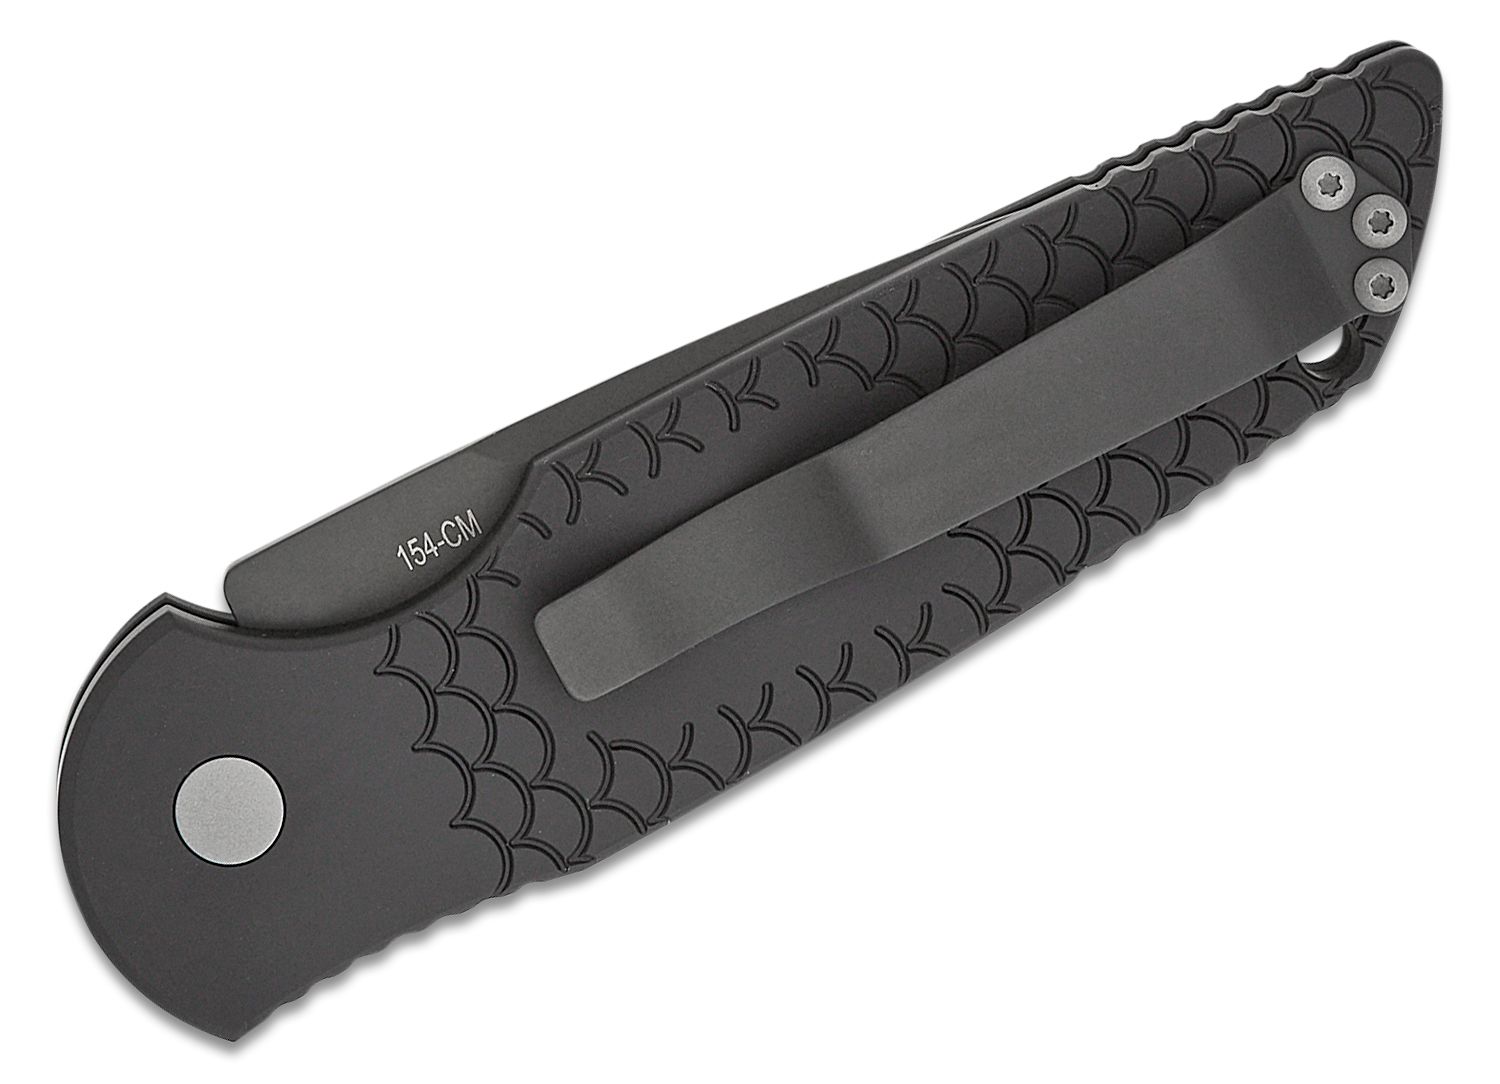 Pro Tech TR 5 Tactical Response Automatic Black Fish Scale 3 25 Black X 1  Knife Information